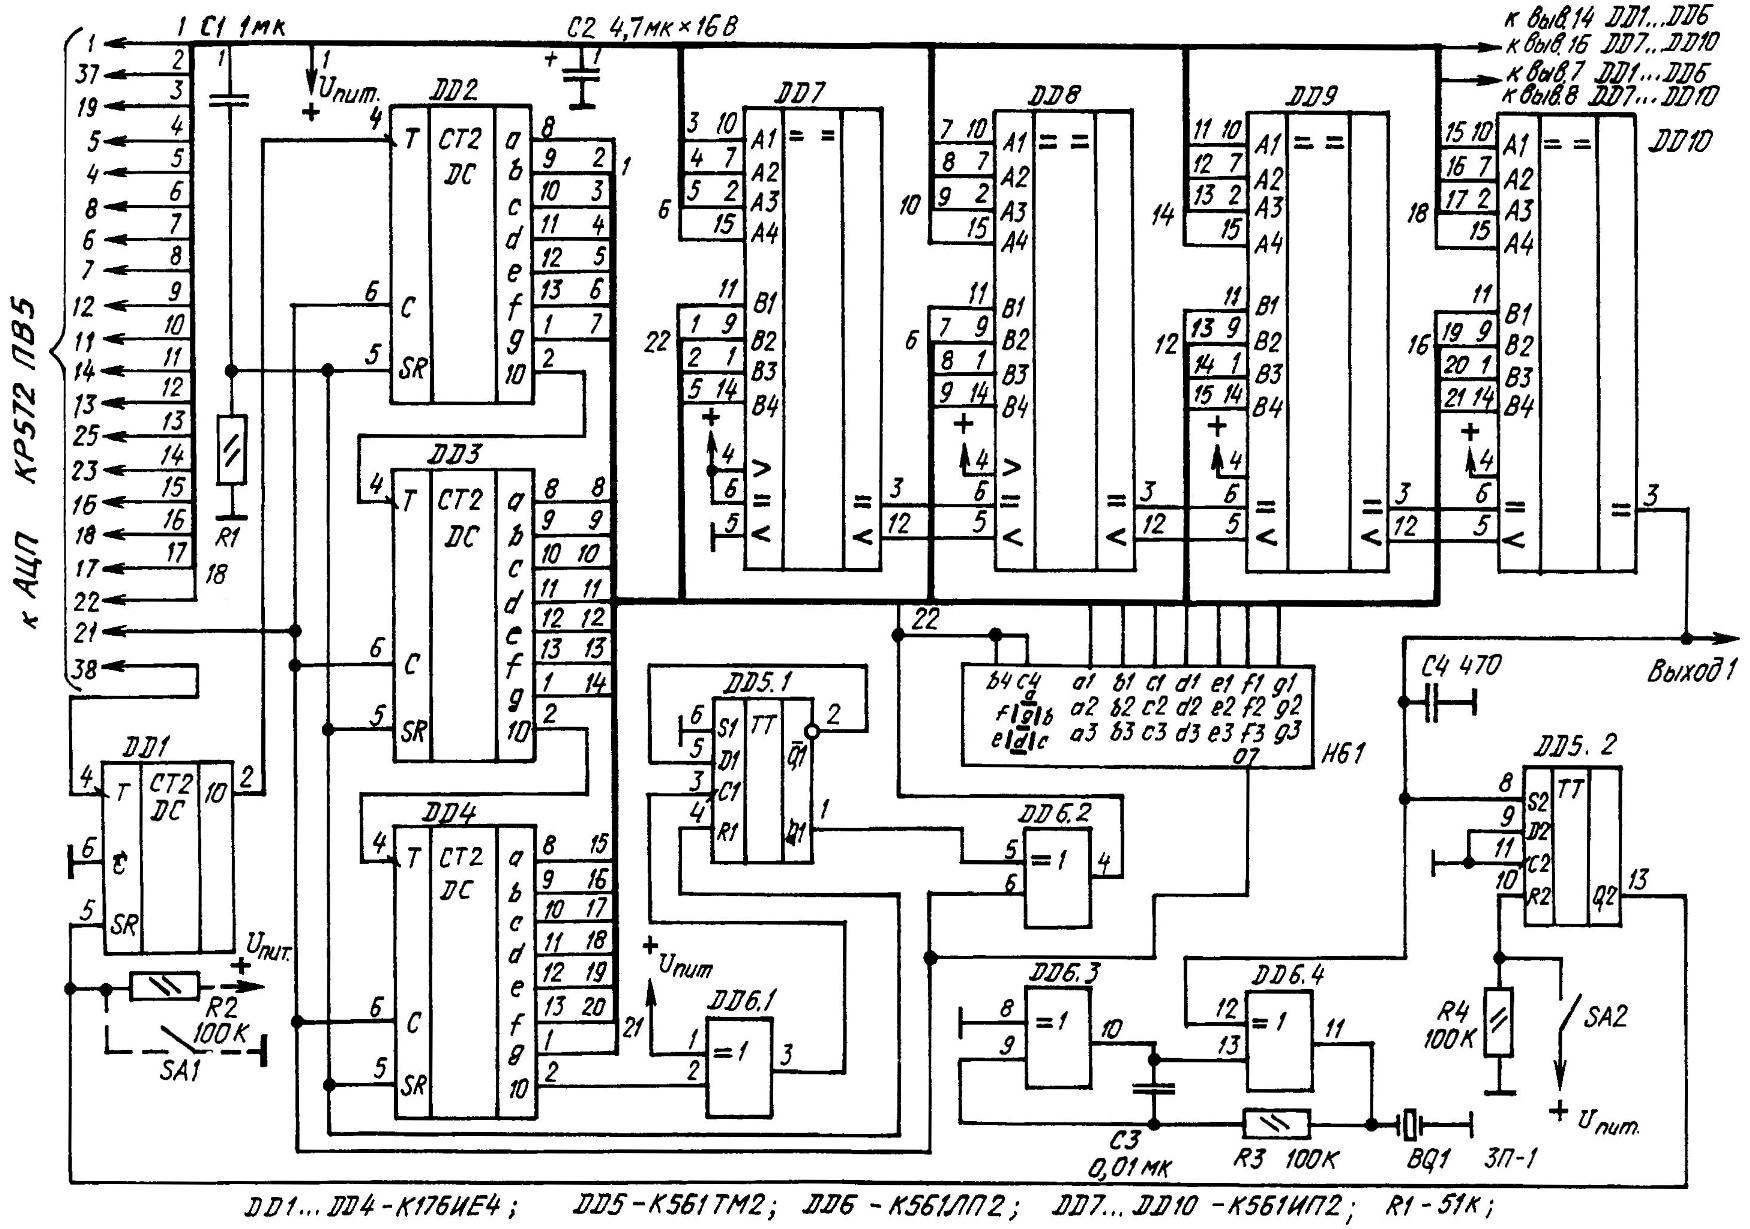 Electrical schematic of a homemade console to the digital multimeter, significantly expanding its real capabilities